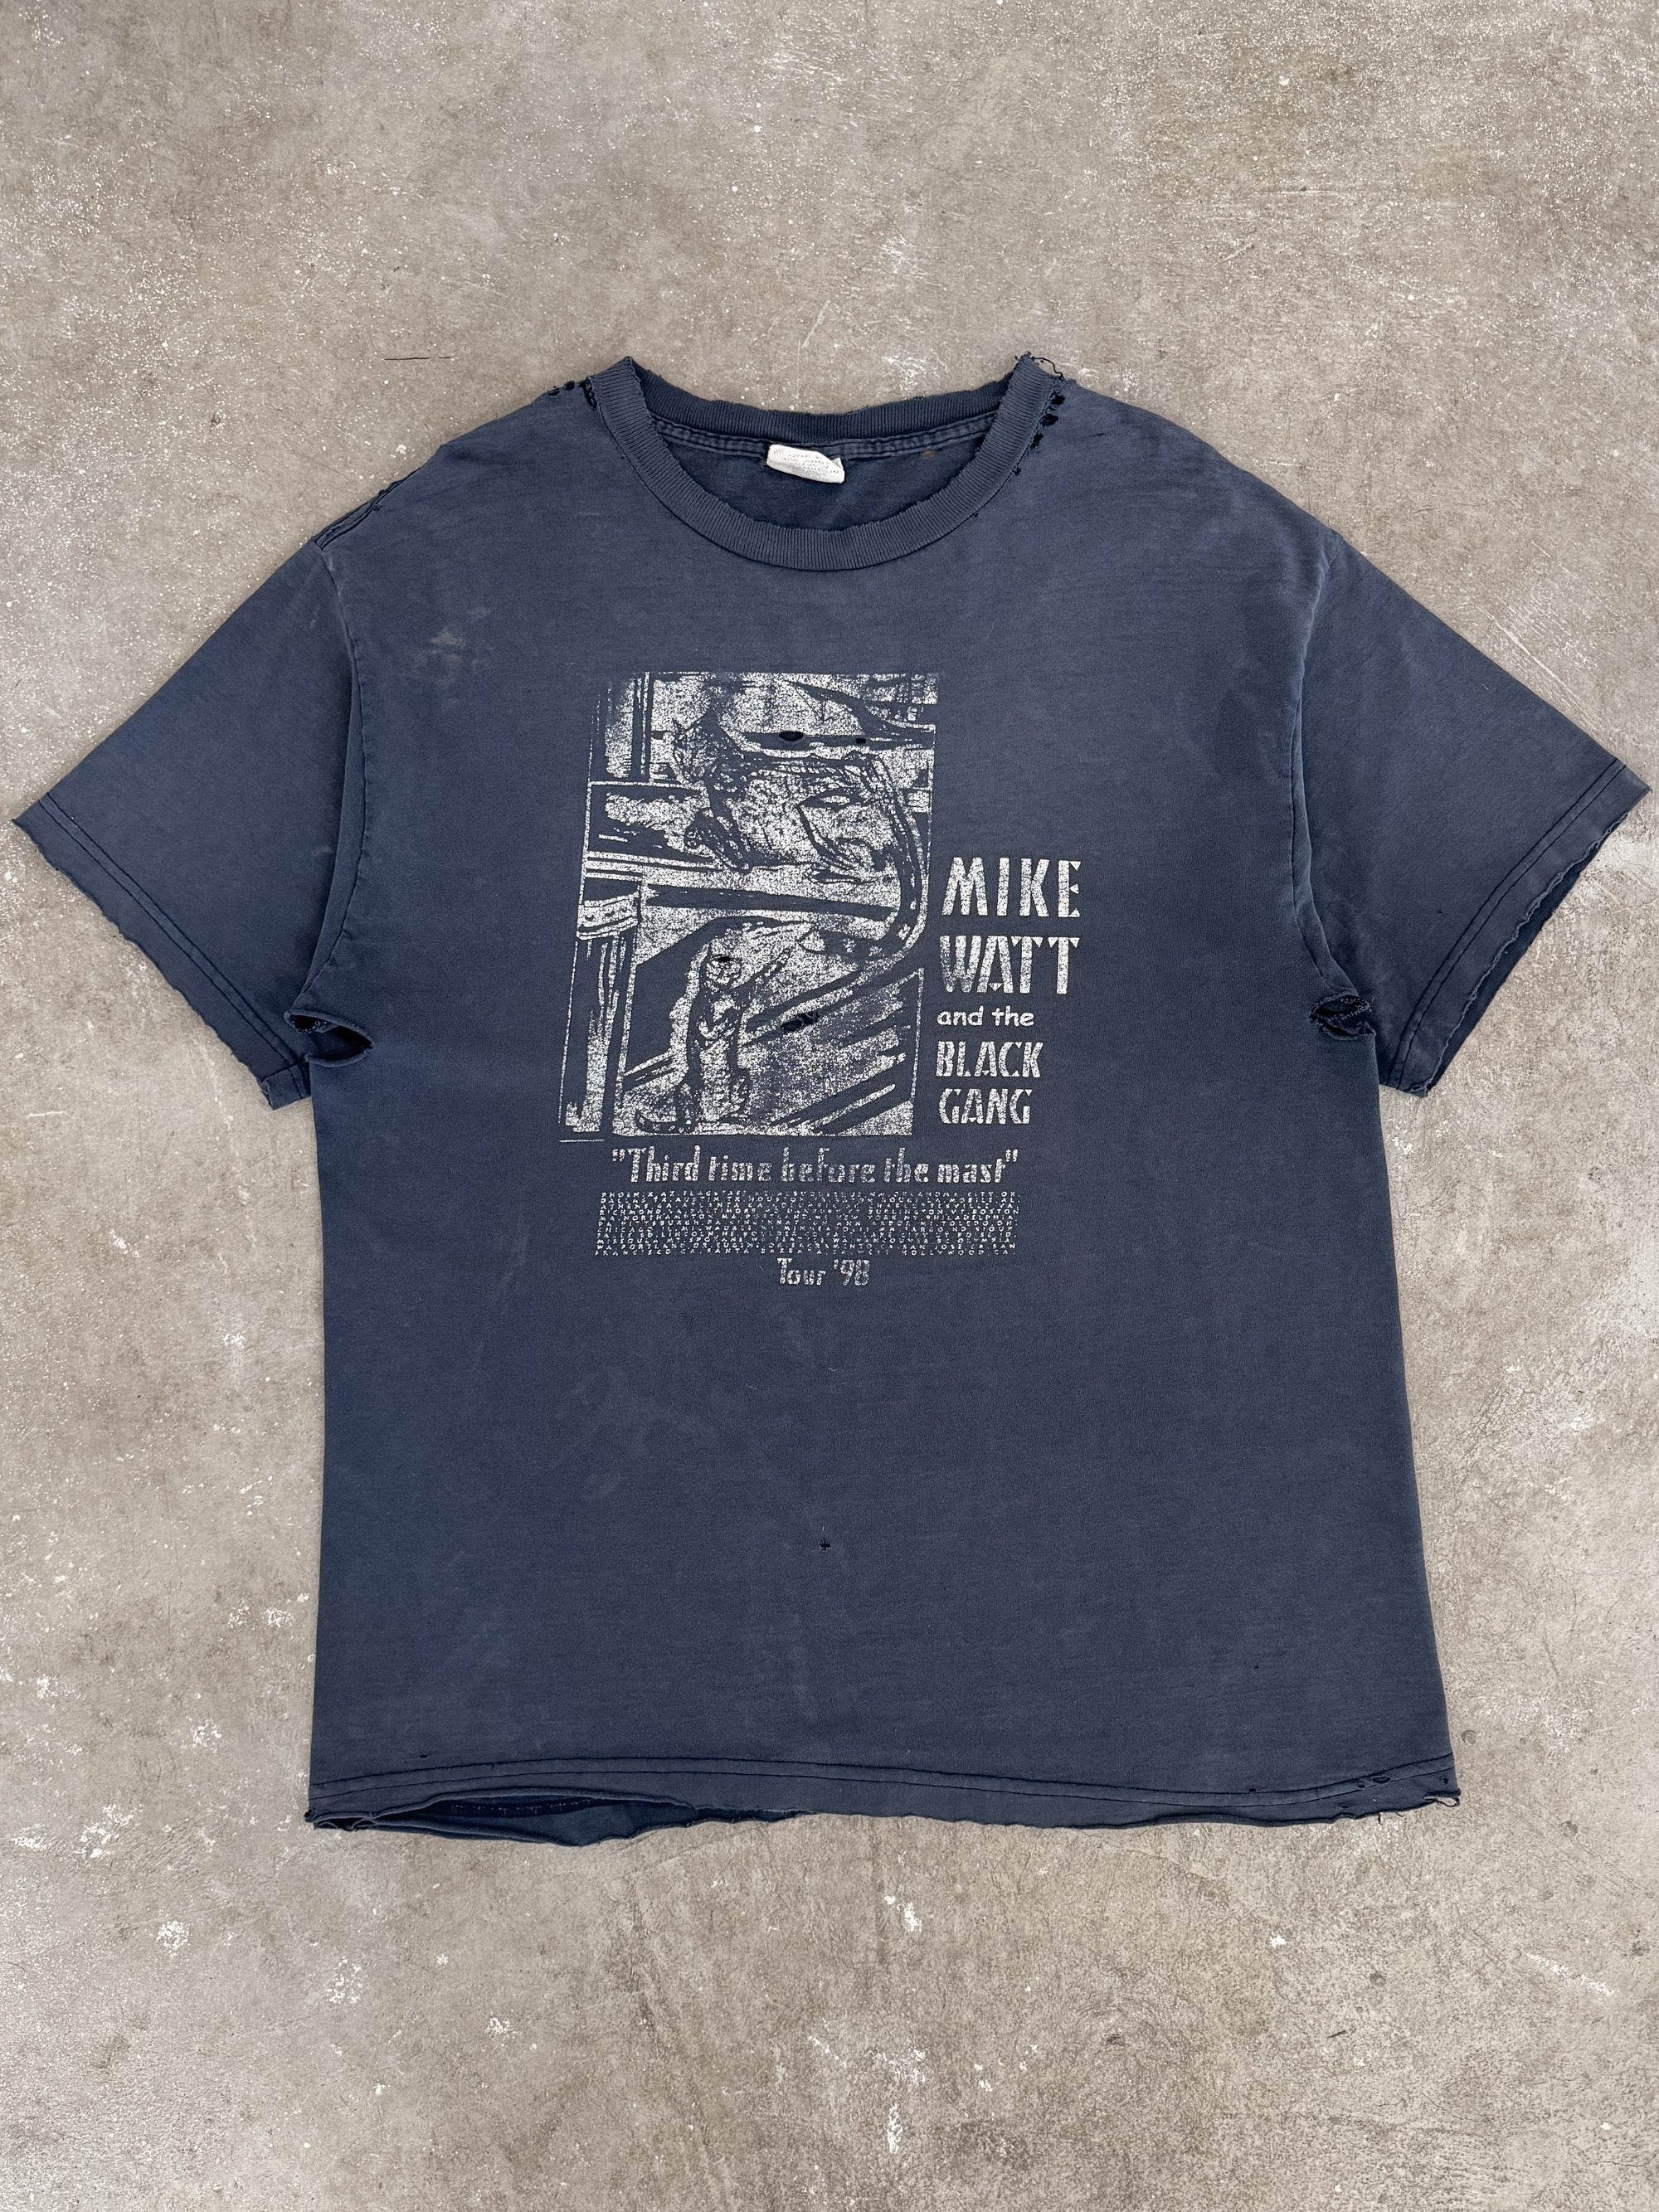 1990s "Mike Watt and the Black Gang" Thrashed Tour Tee (XL)